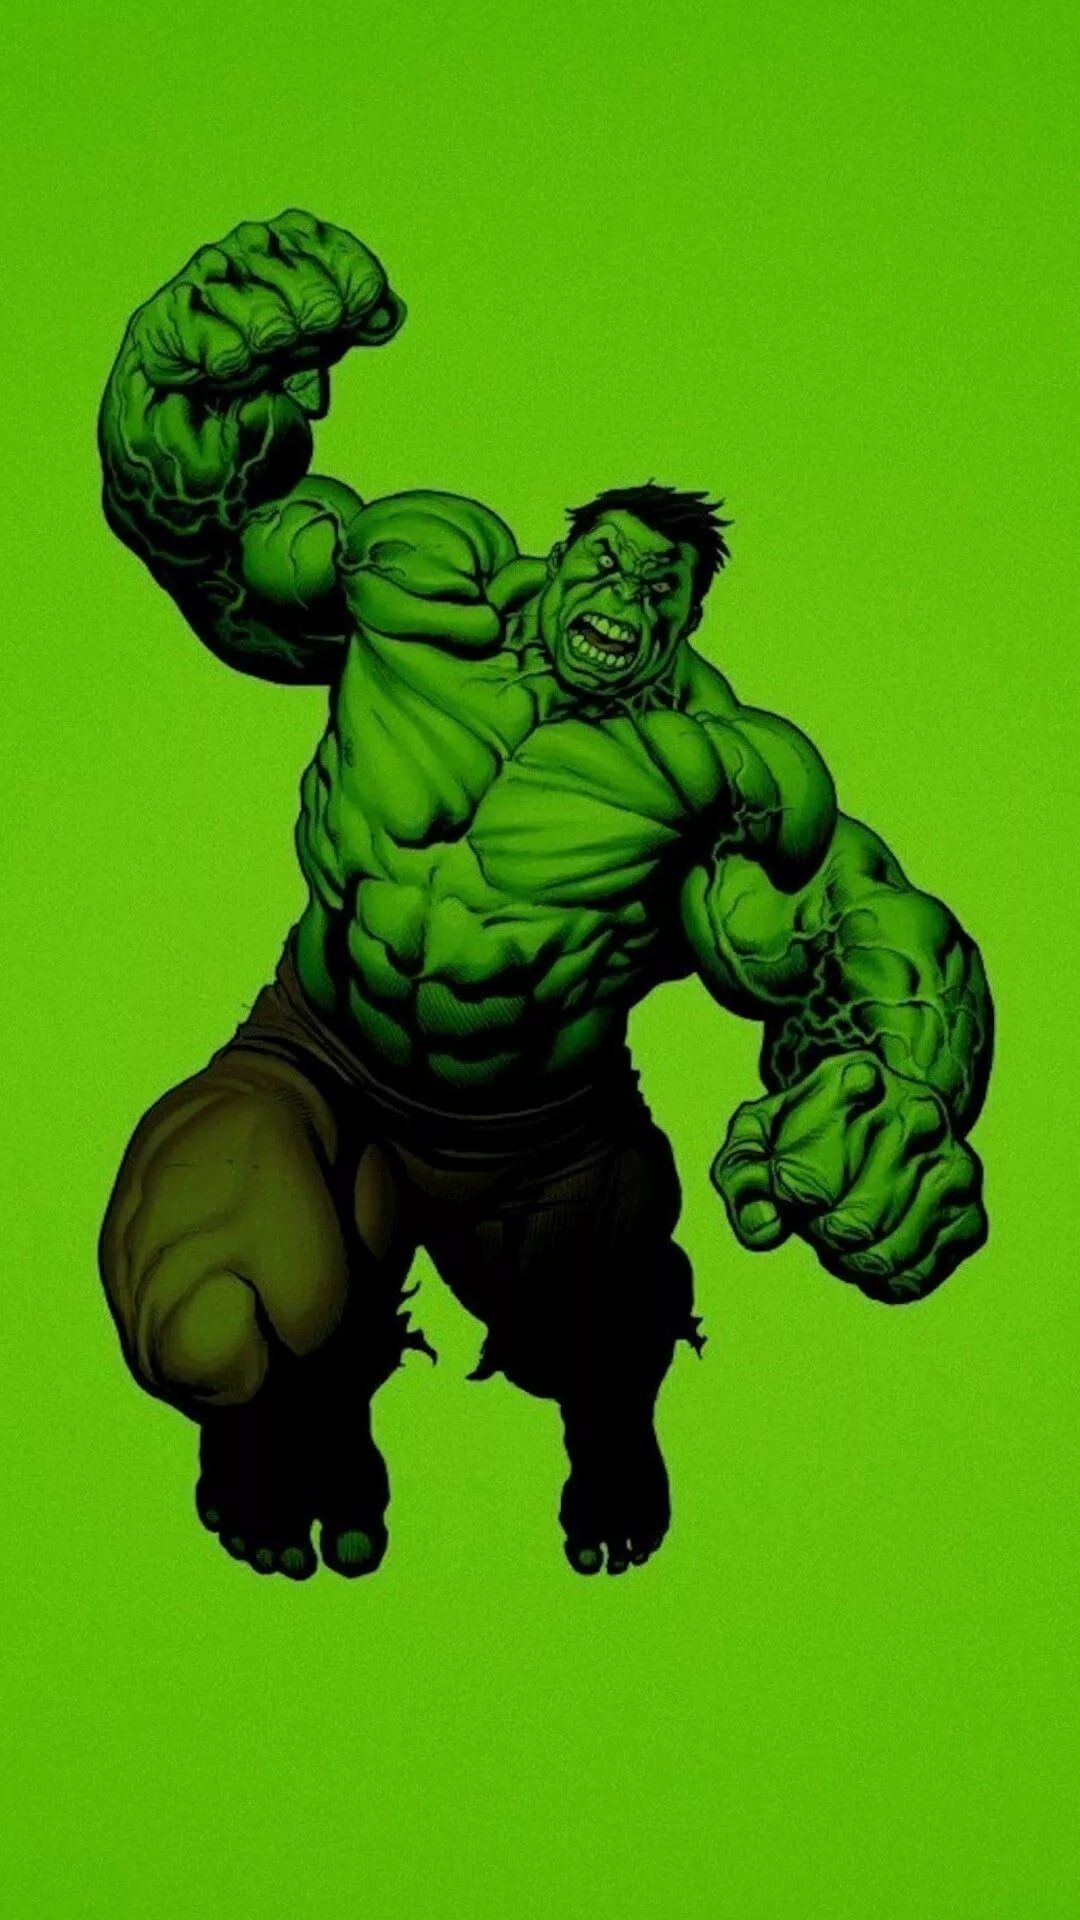 Hulk 3d Wallpaper For Android Image Num 65